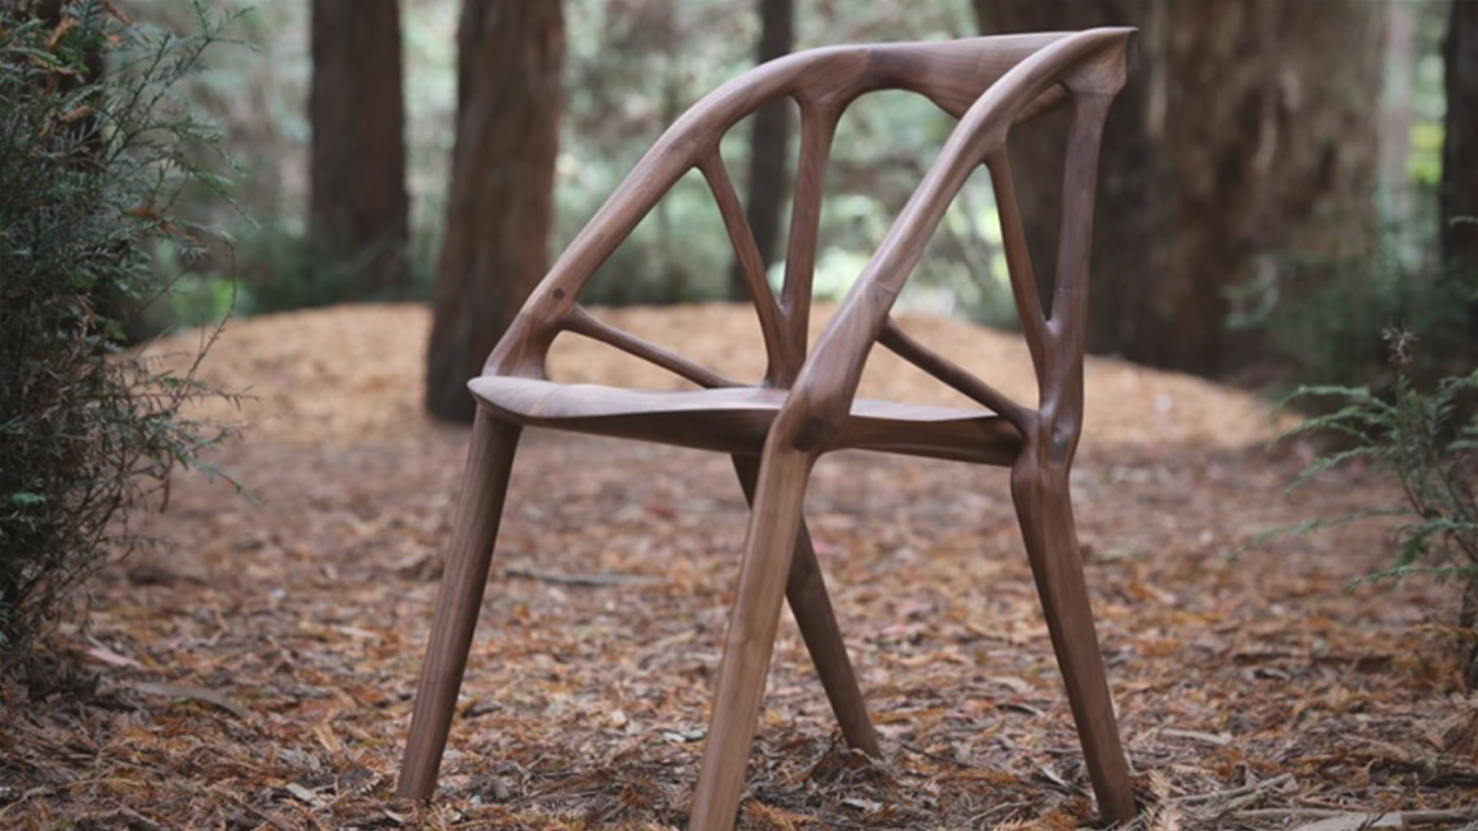  A chair design that's generated by software 